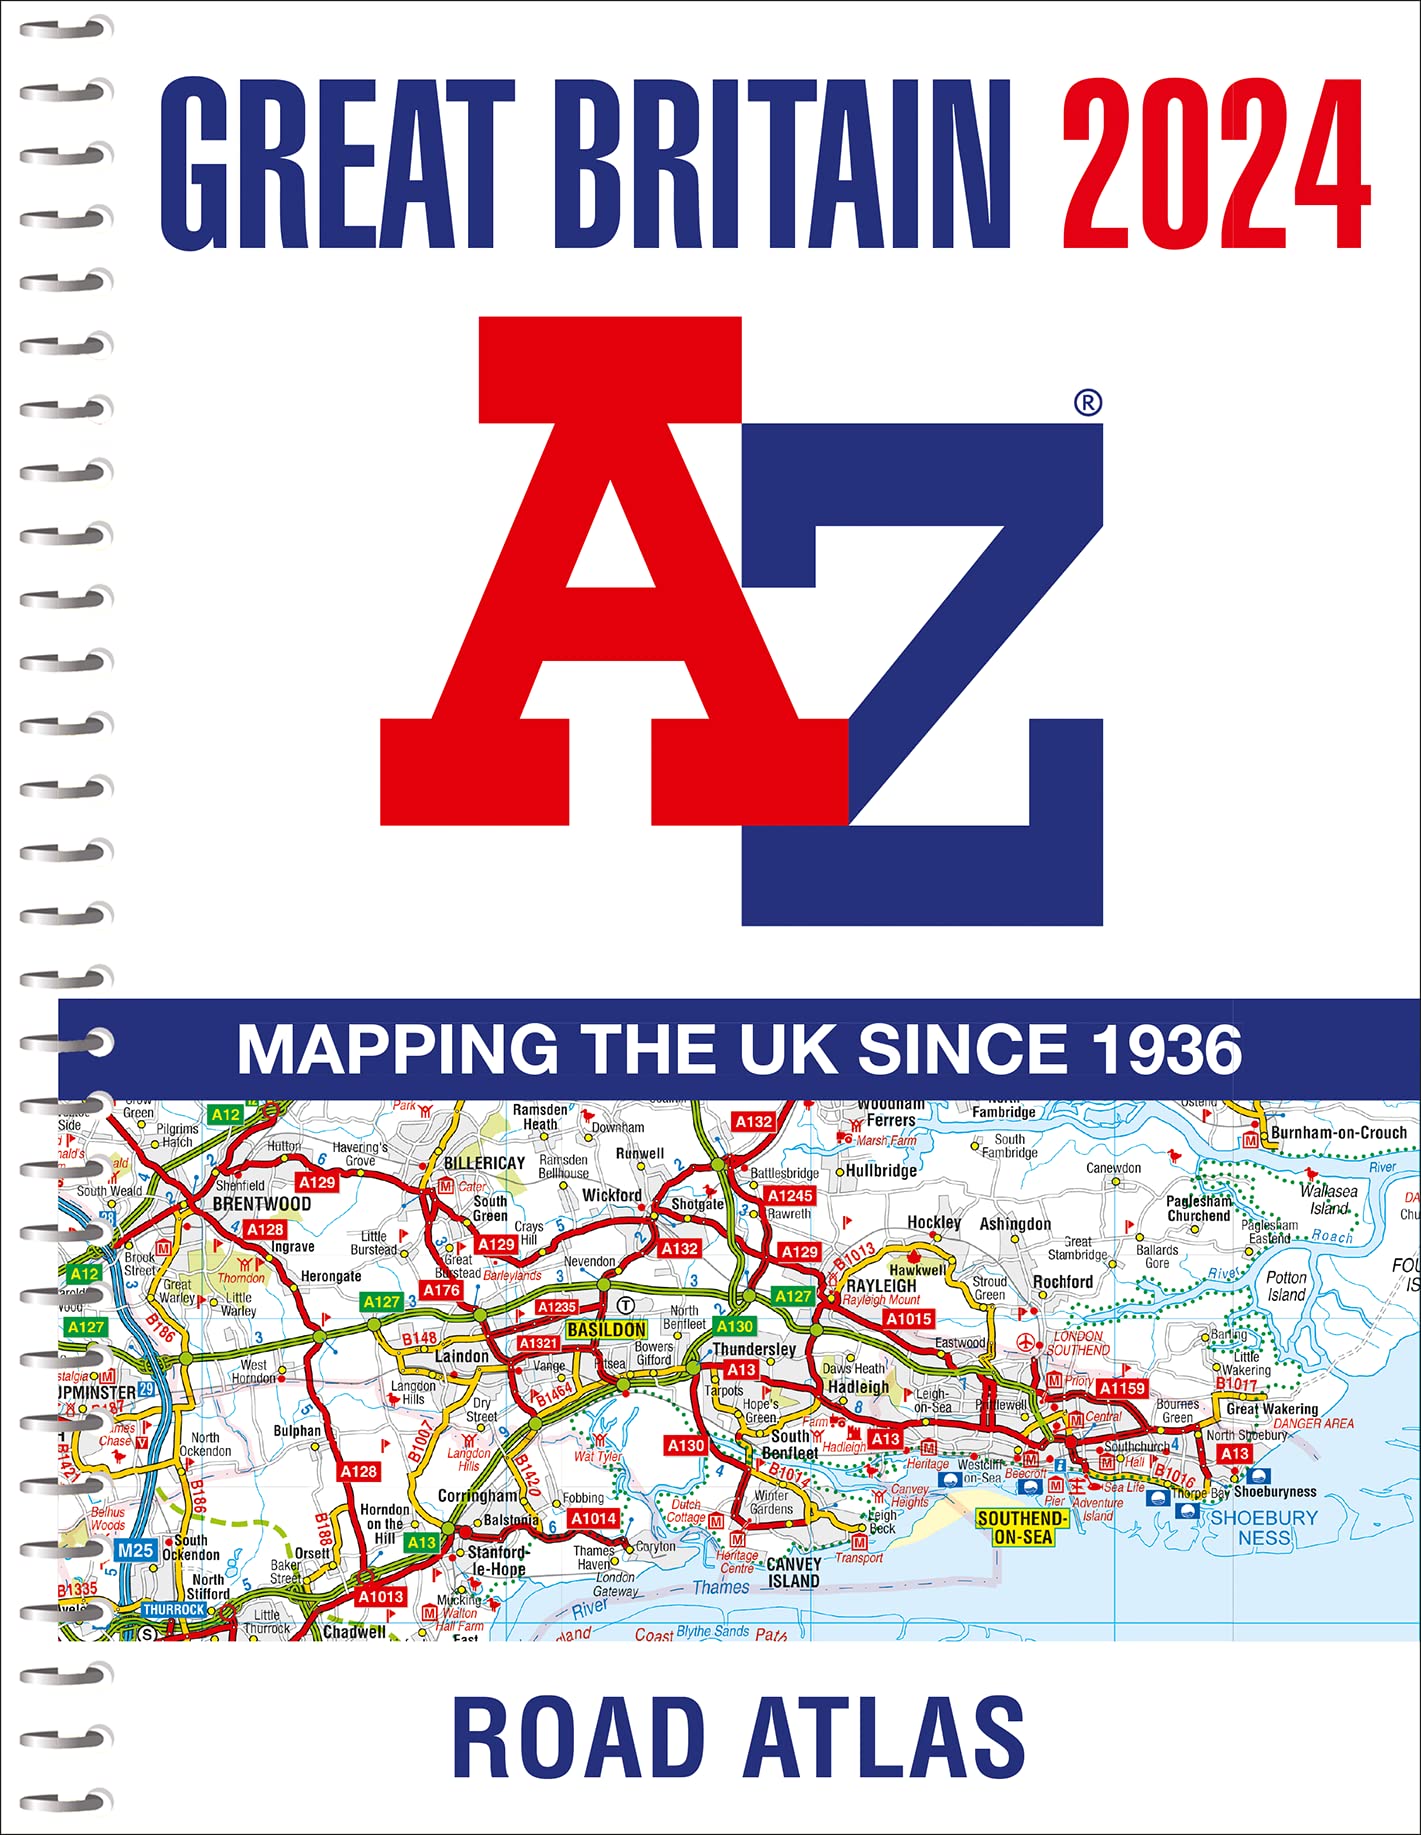 Great Britain Spiral Road Atlas by A-Z Maps (2024)